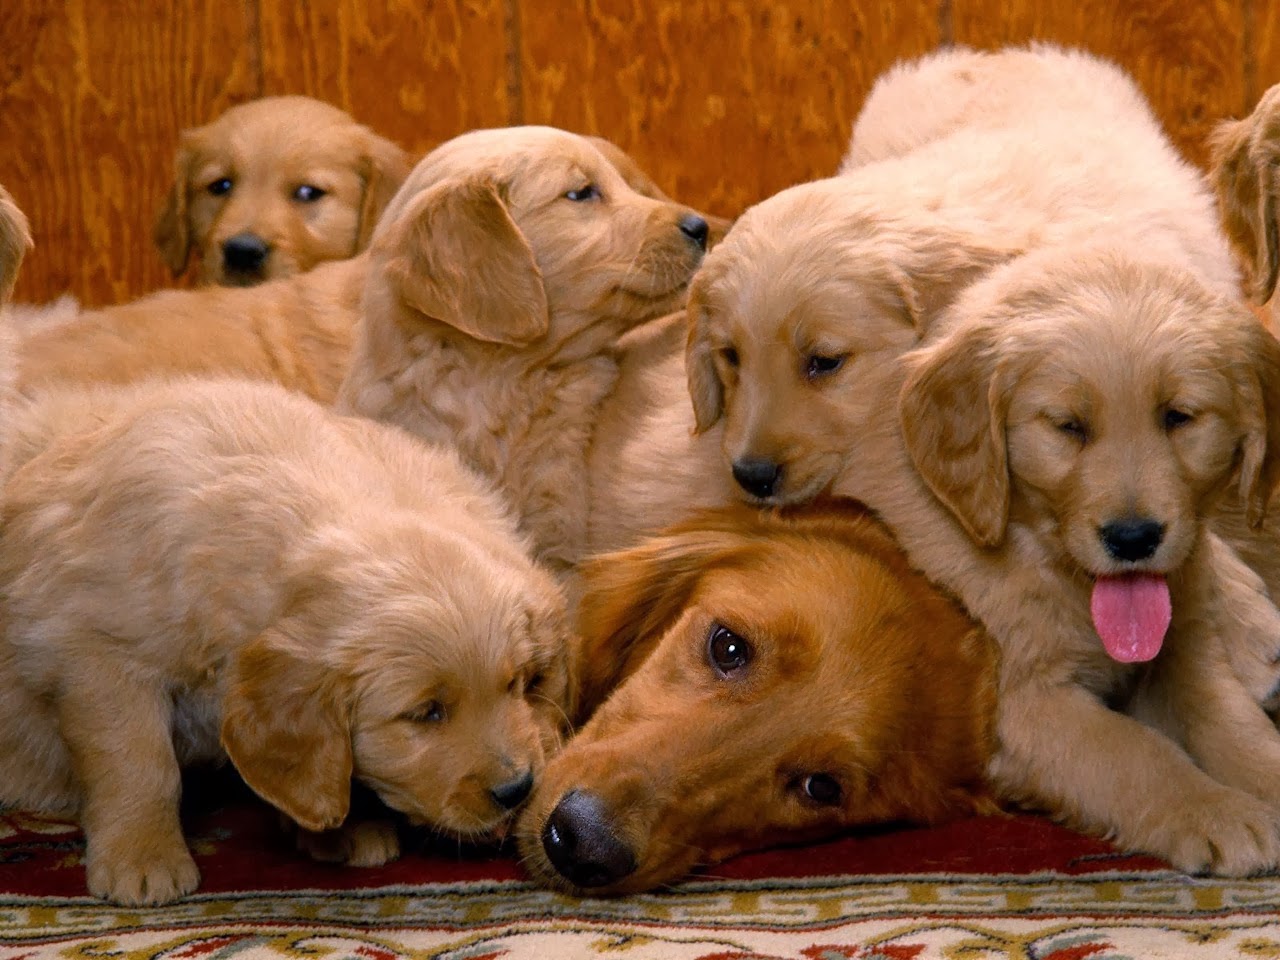 Cute dogs - part 9 (50 pics), golden retriever mommy and her puppies